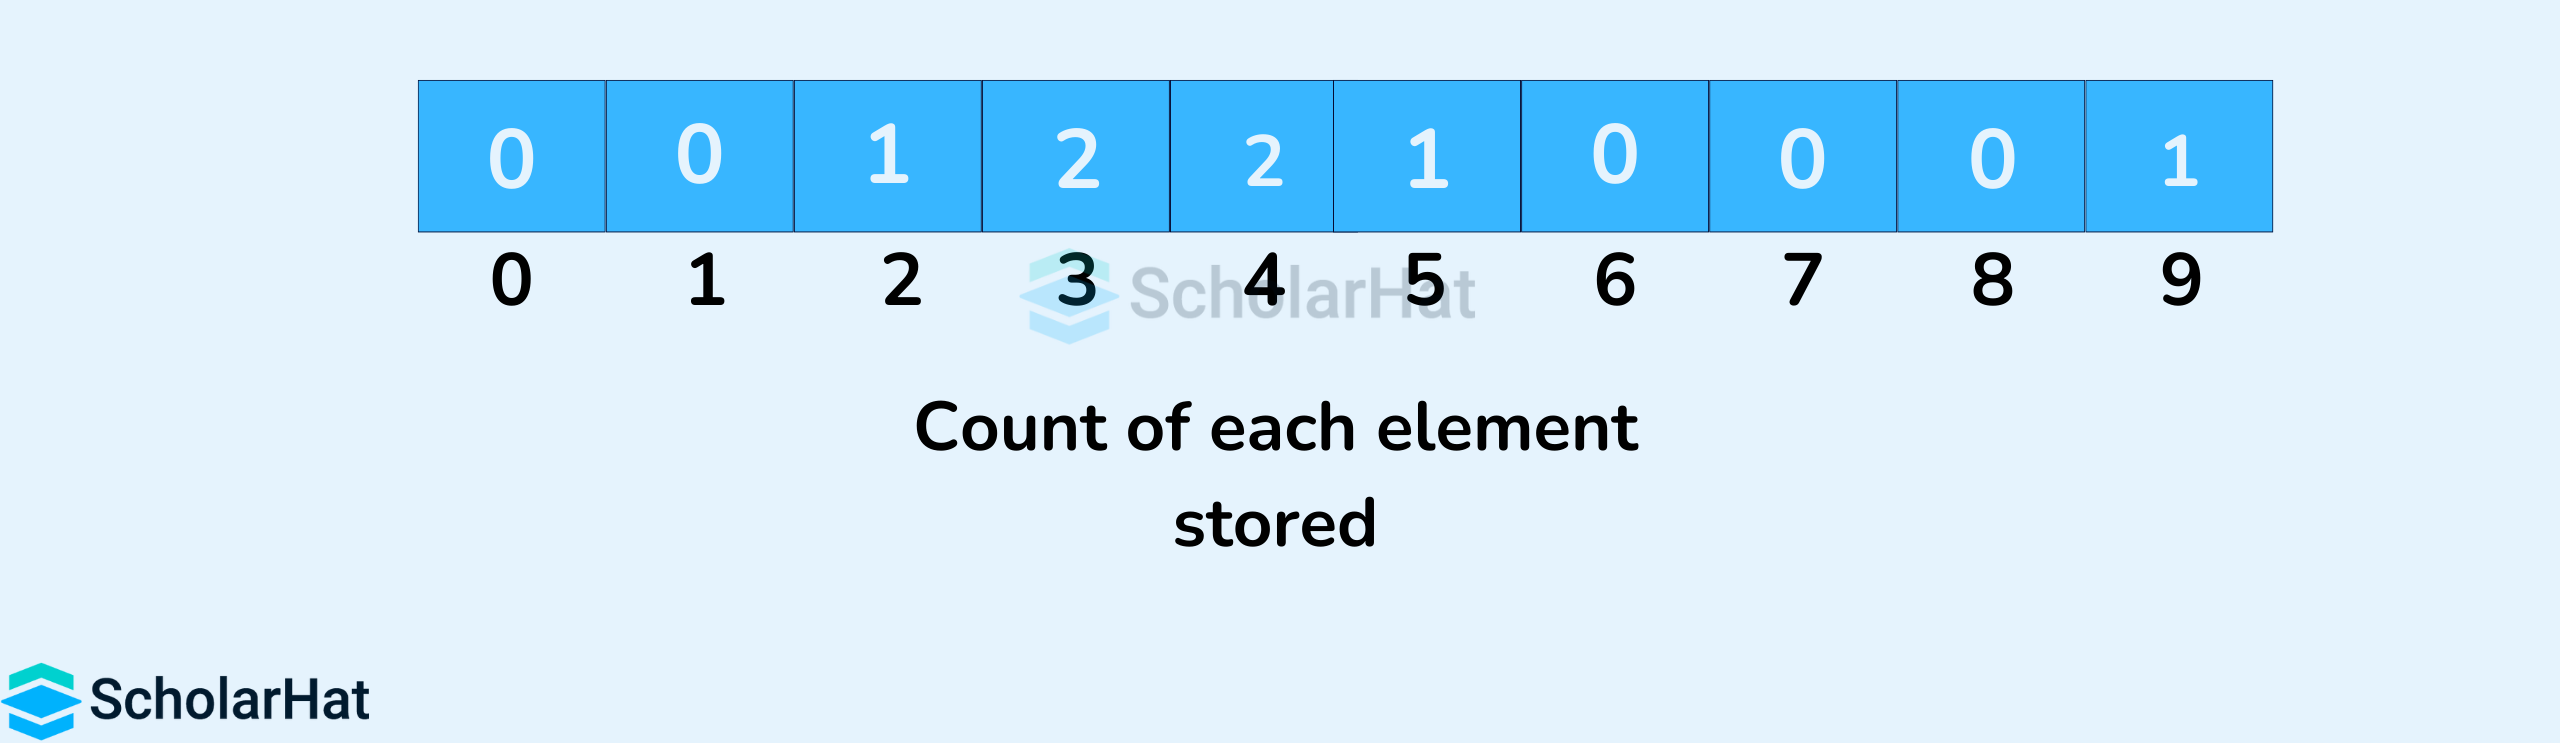 Count of each element stored